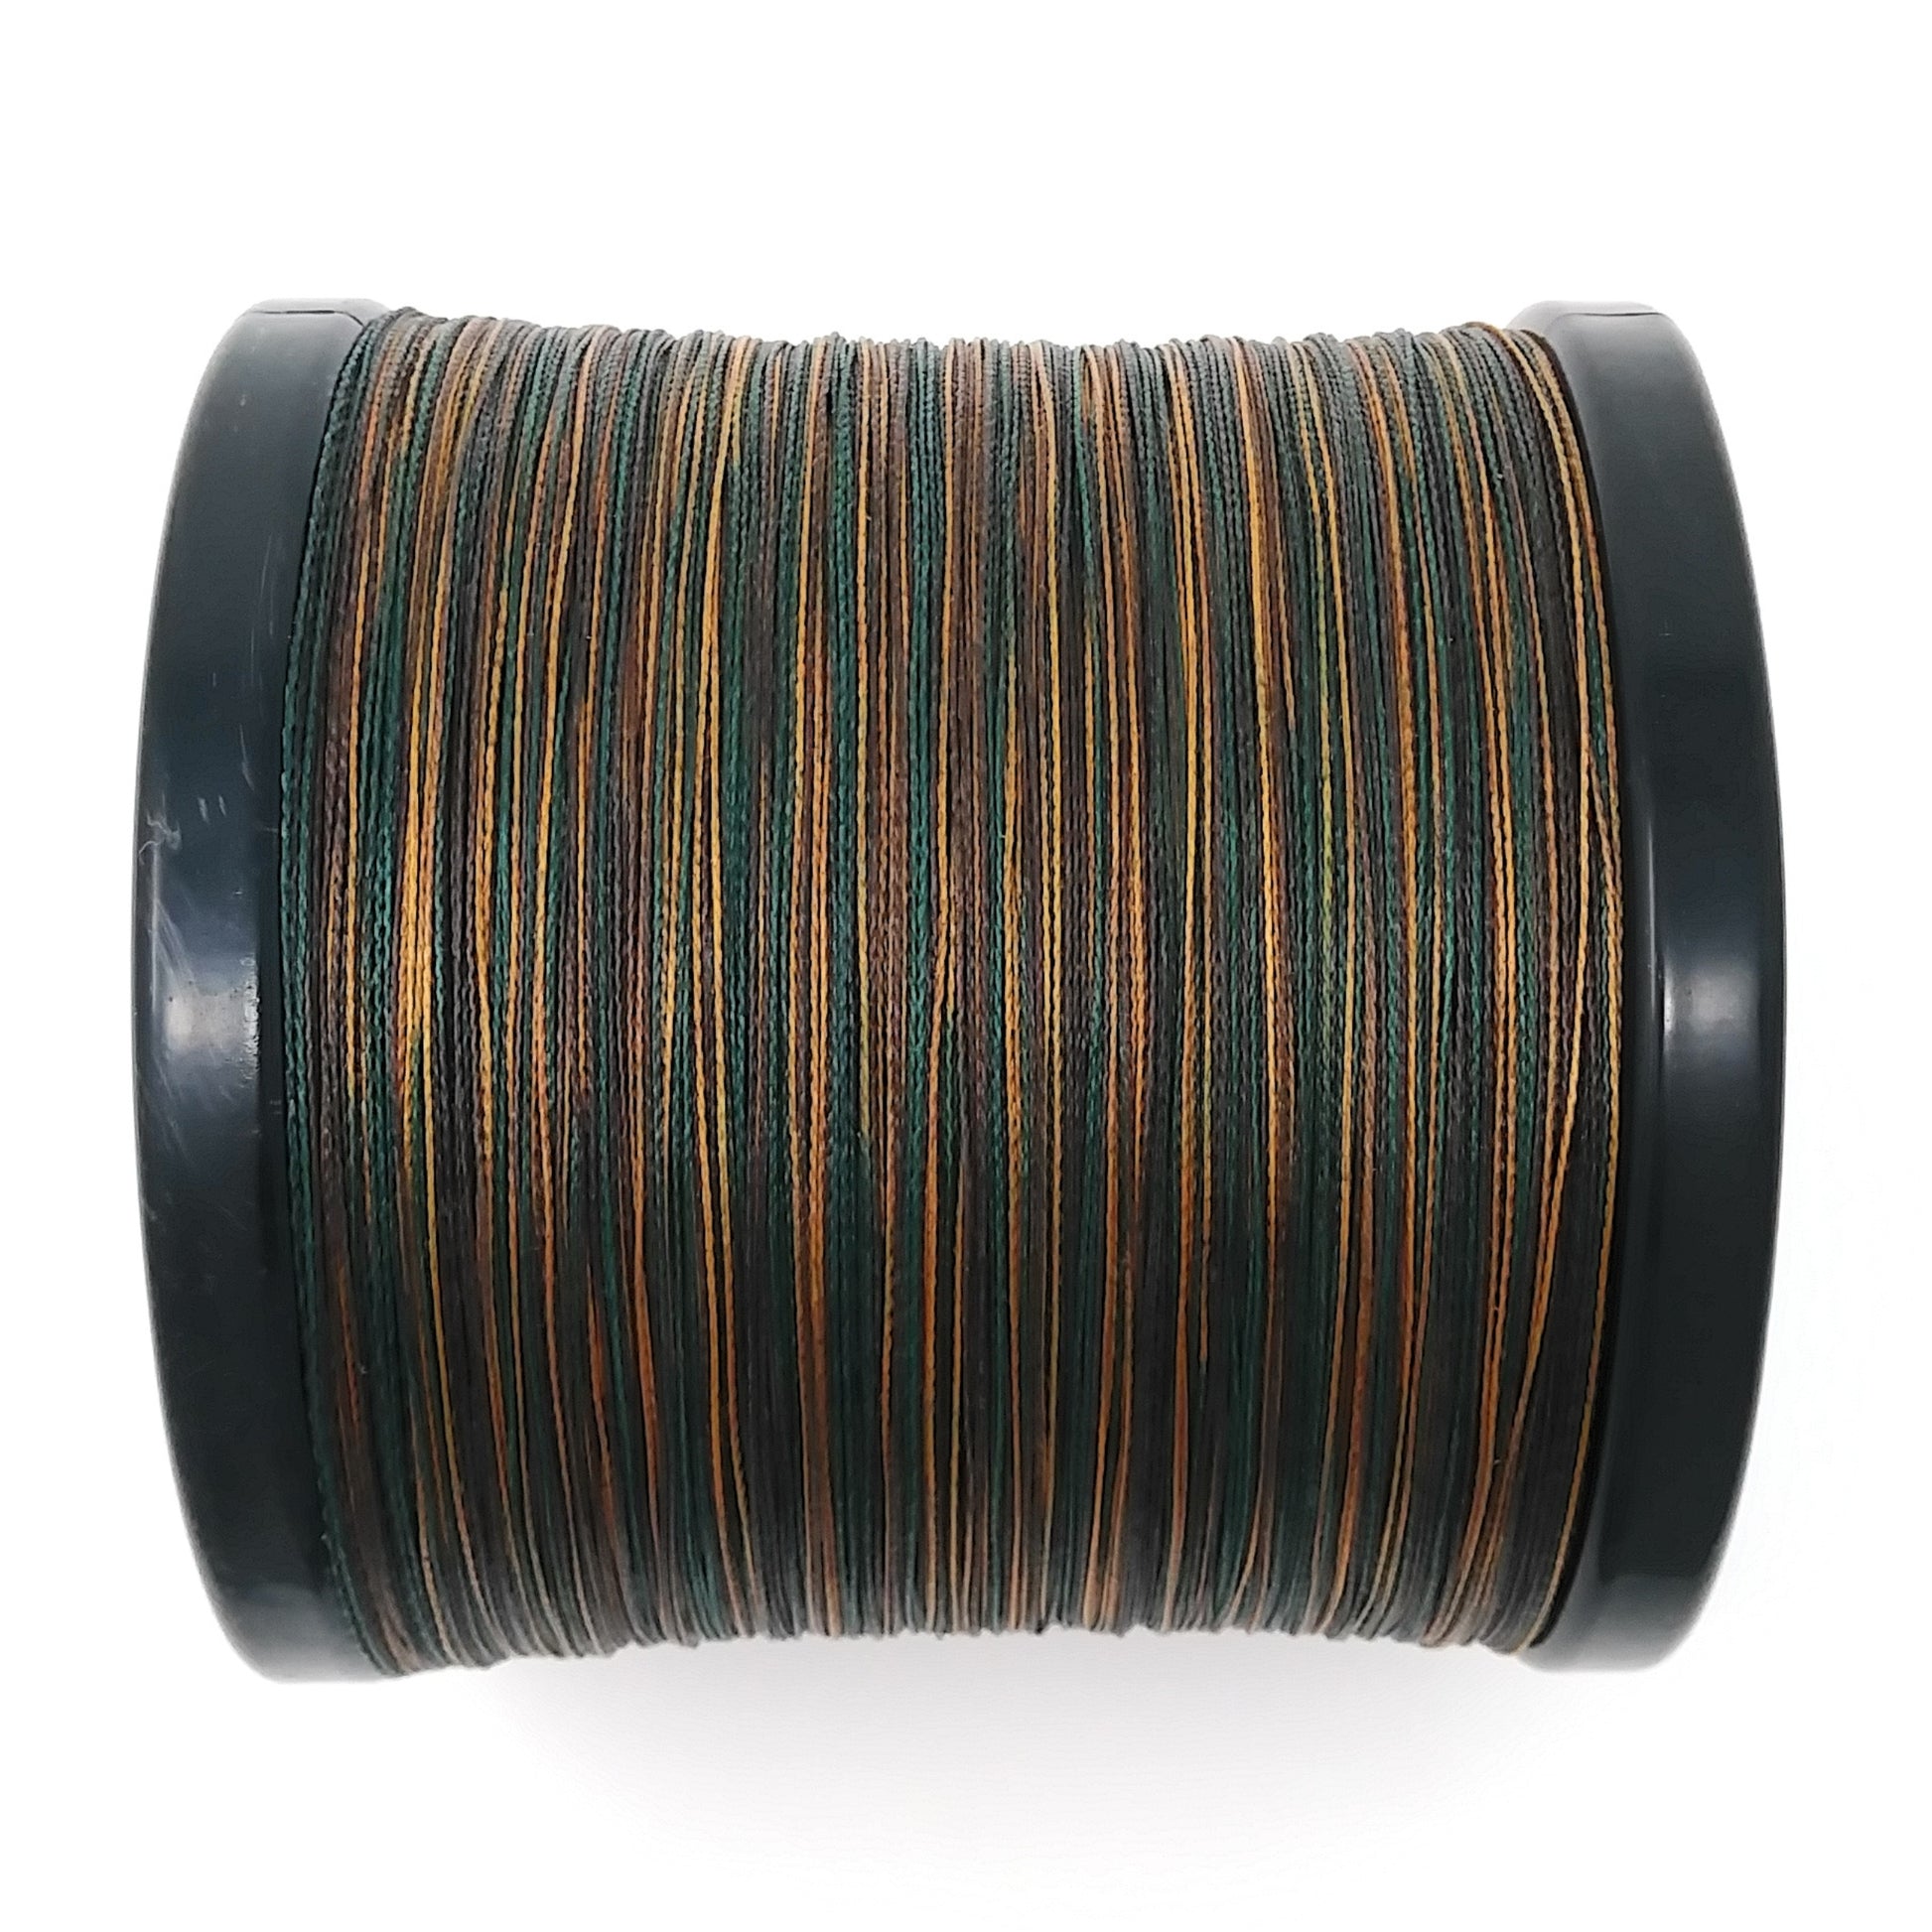 Green Camo - Reaction Tackle Braided Fishing Line